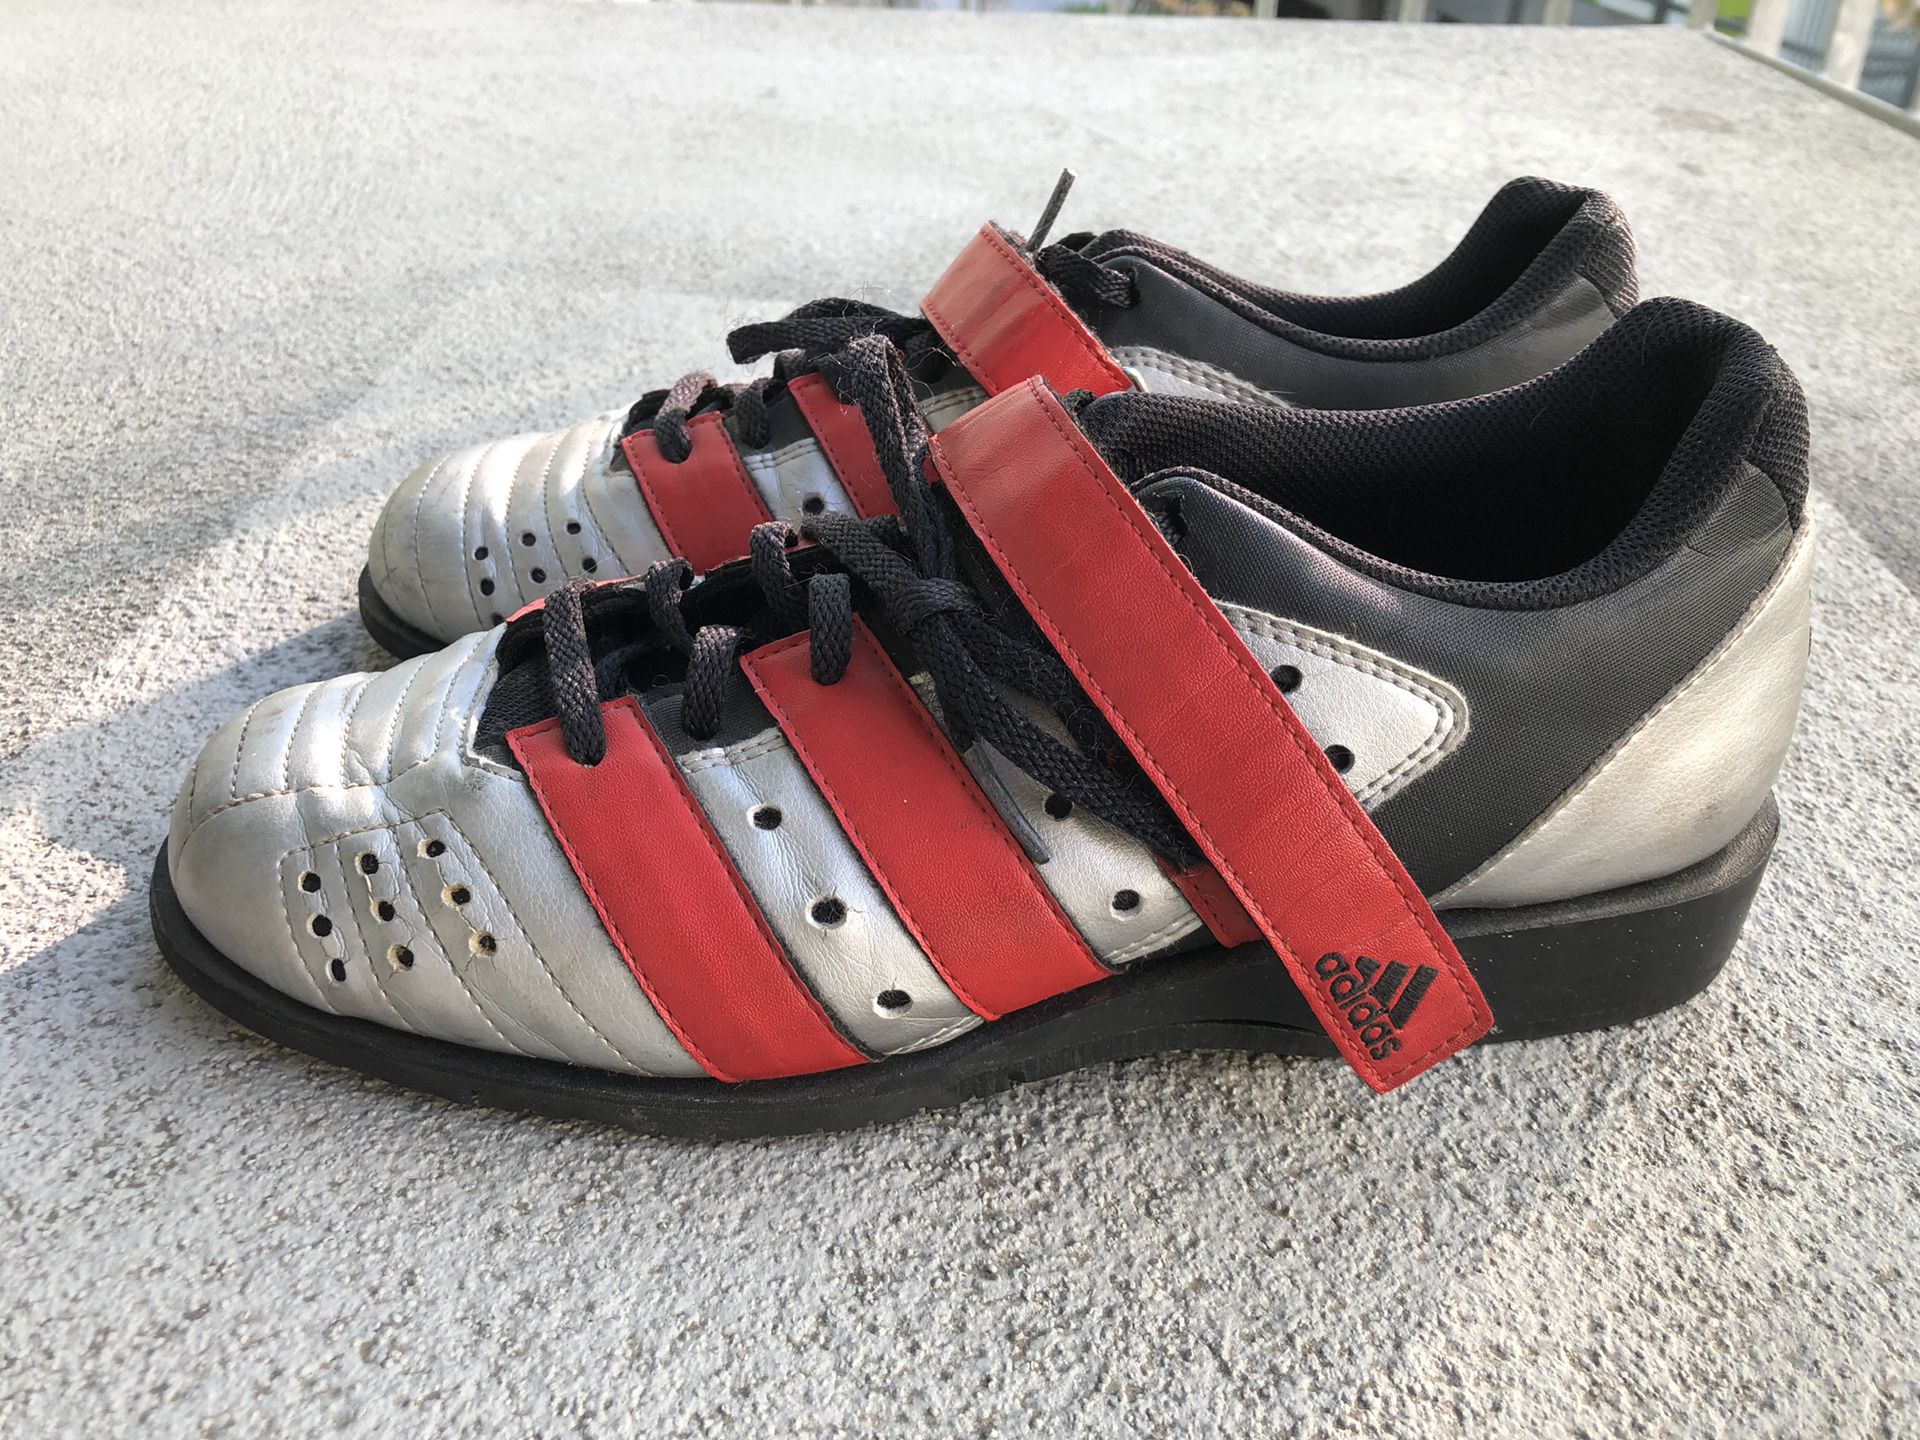 Adidas II Olympic weightlifting shoes for in Playa del Rey, -